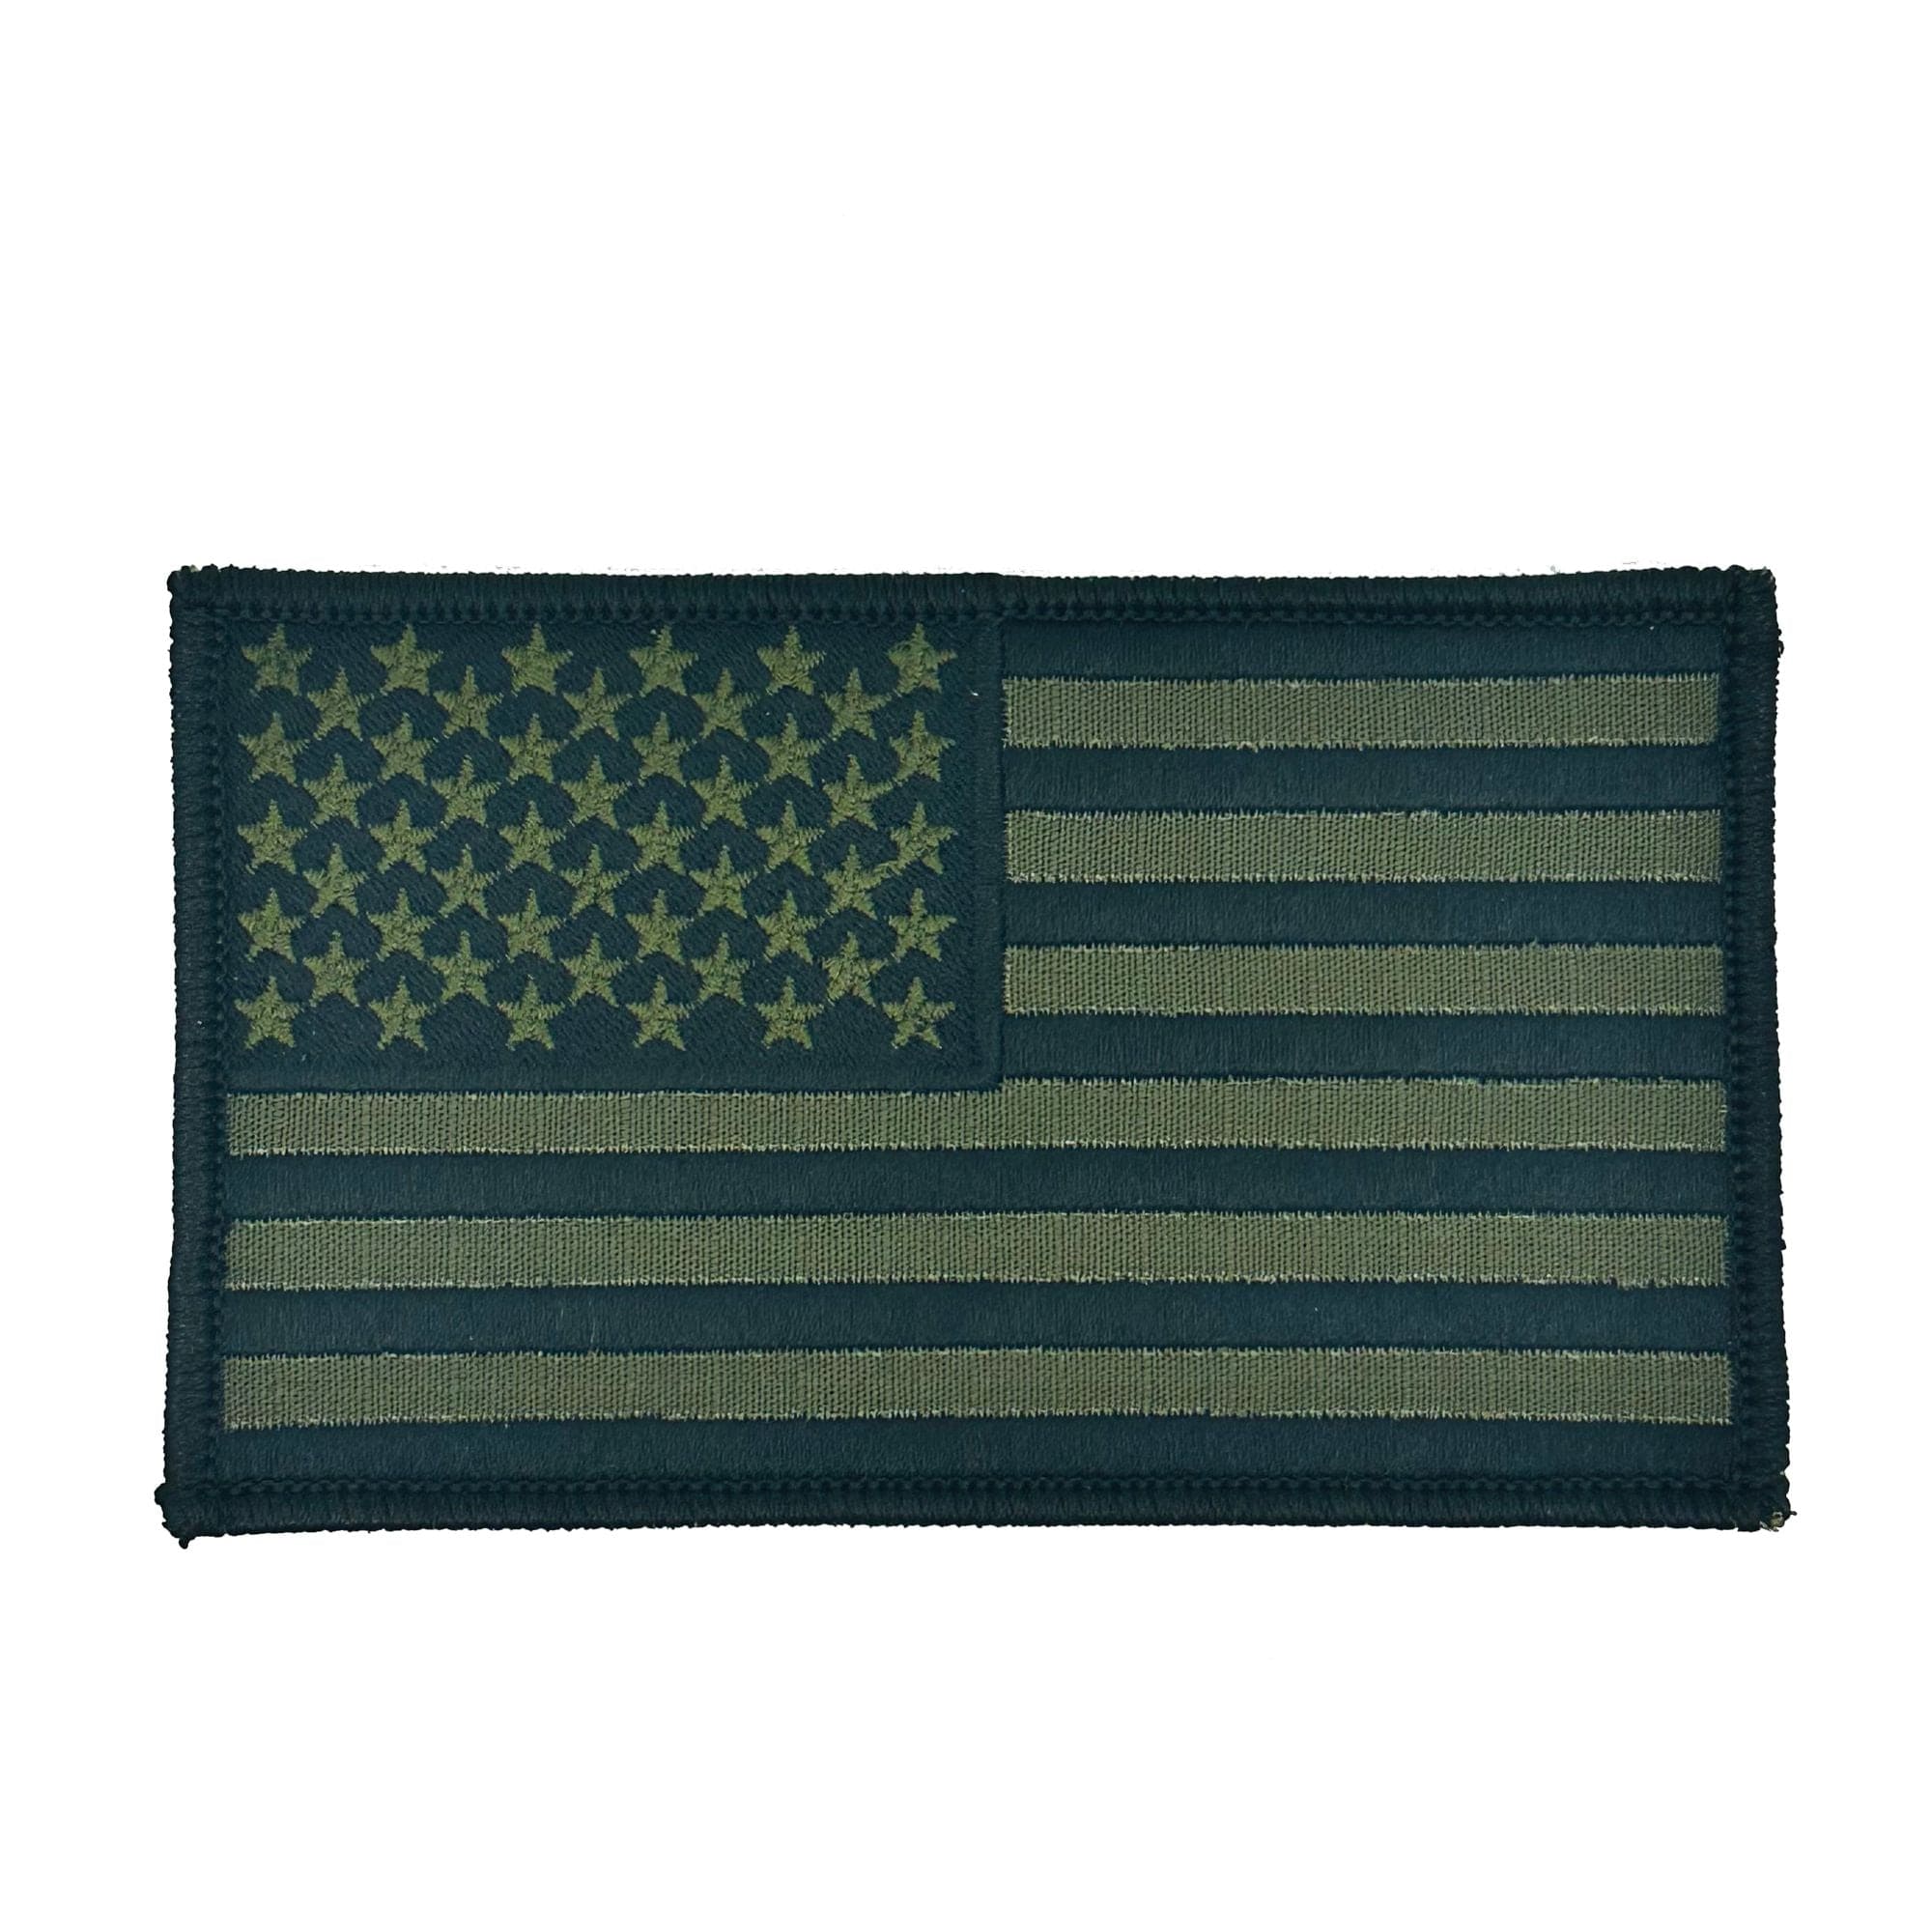 PVC Large 3x5 inch Color Tactical US USA Flag (Hook/Loop) Patch